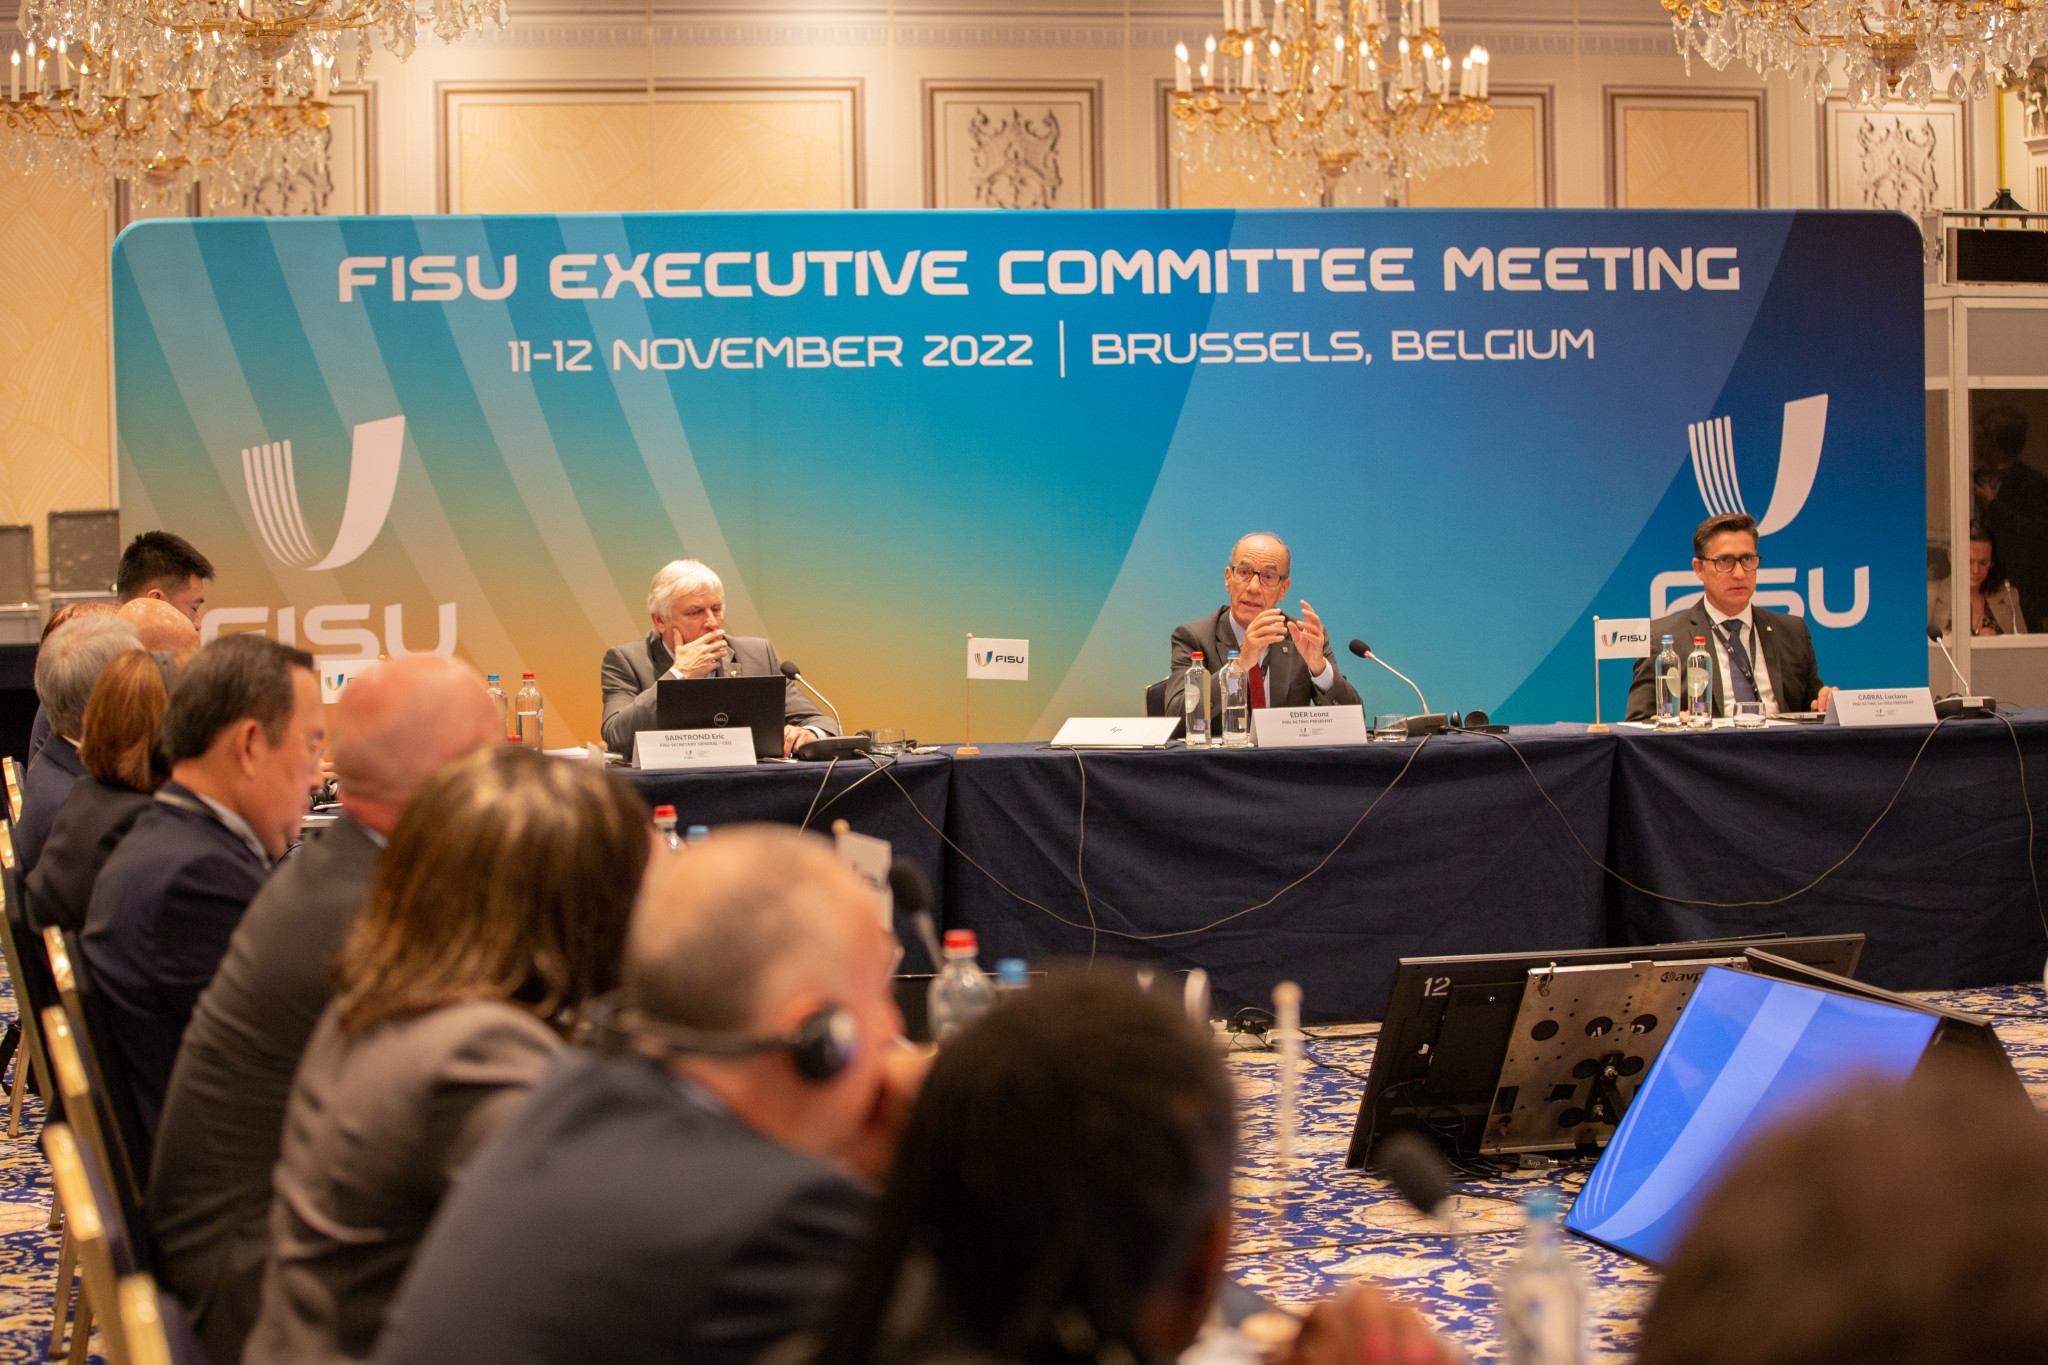 Members of the FISU Executive Committee gathered in Brussels to decide the host for the 2027 World University Games ©FISU